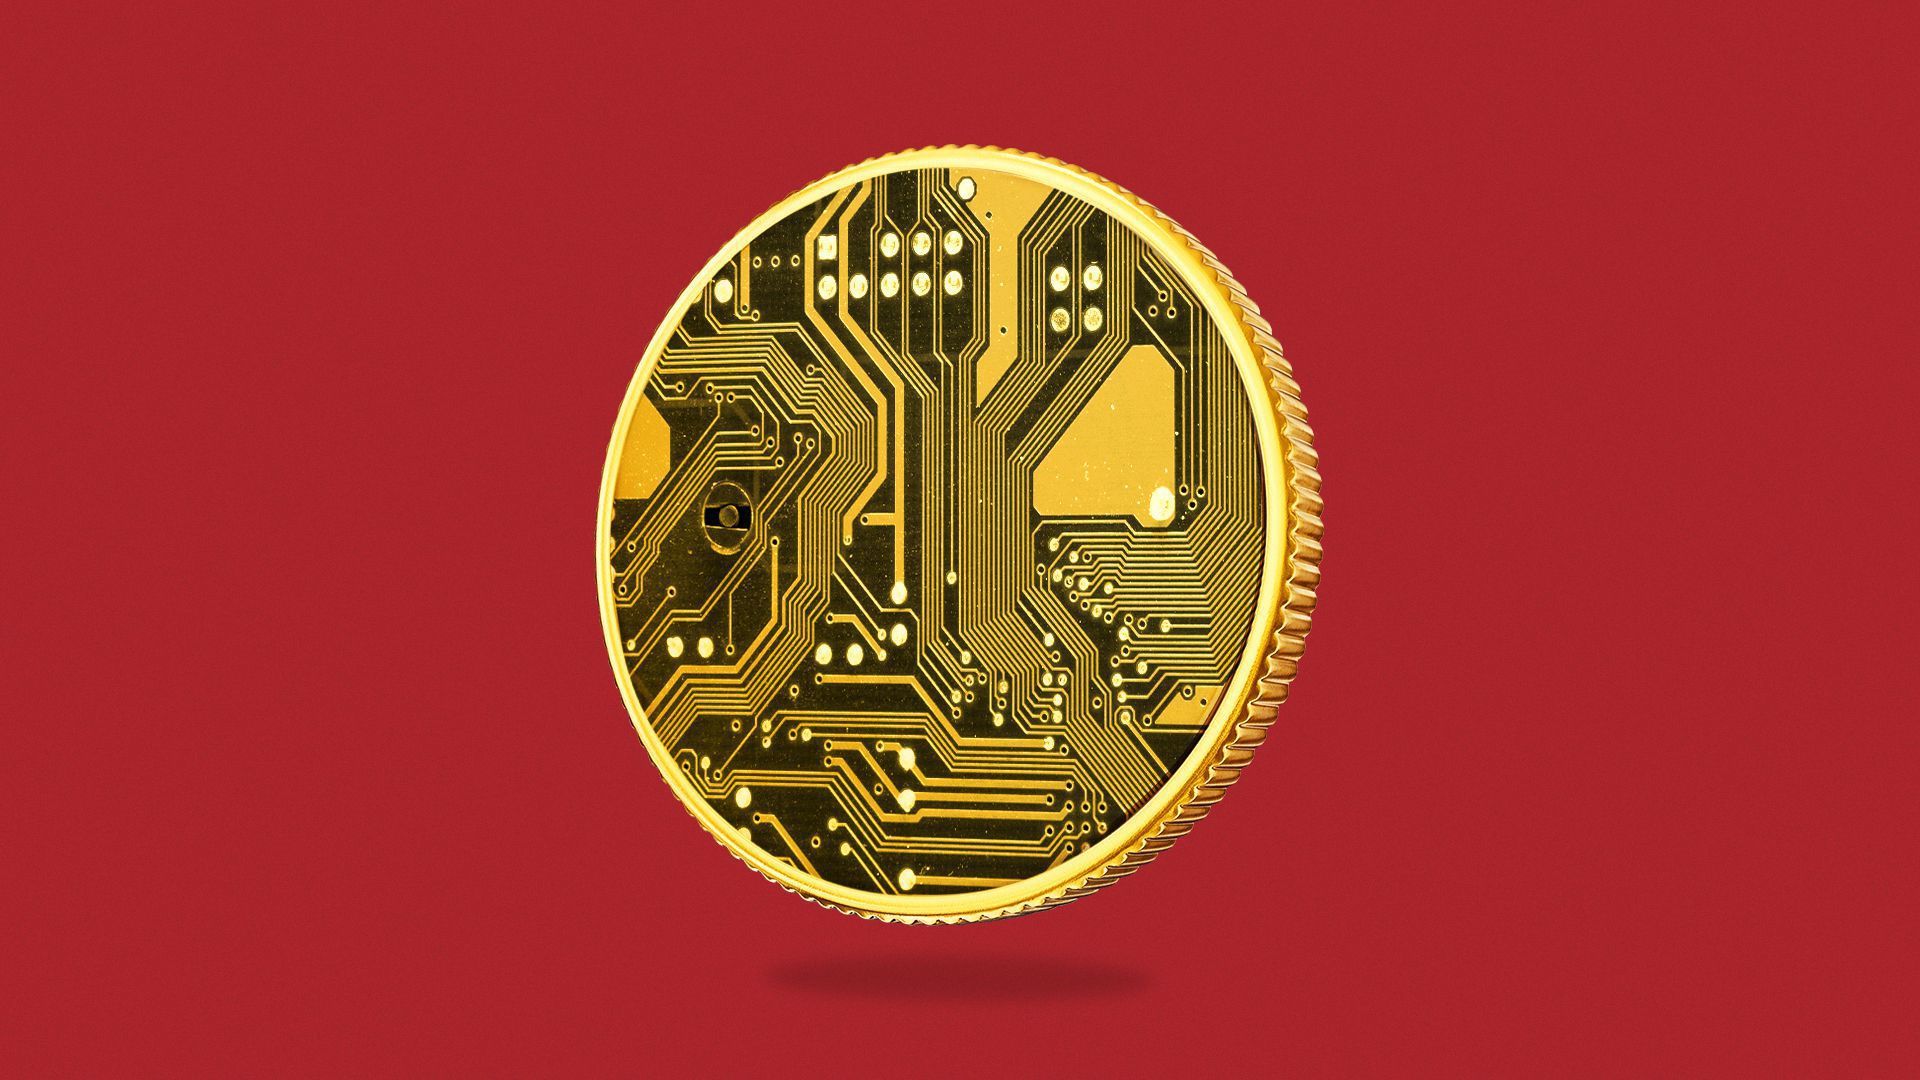 Image of a digital coin on a red background.